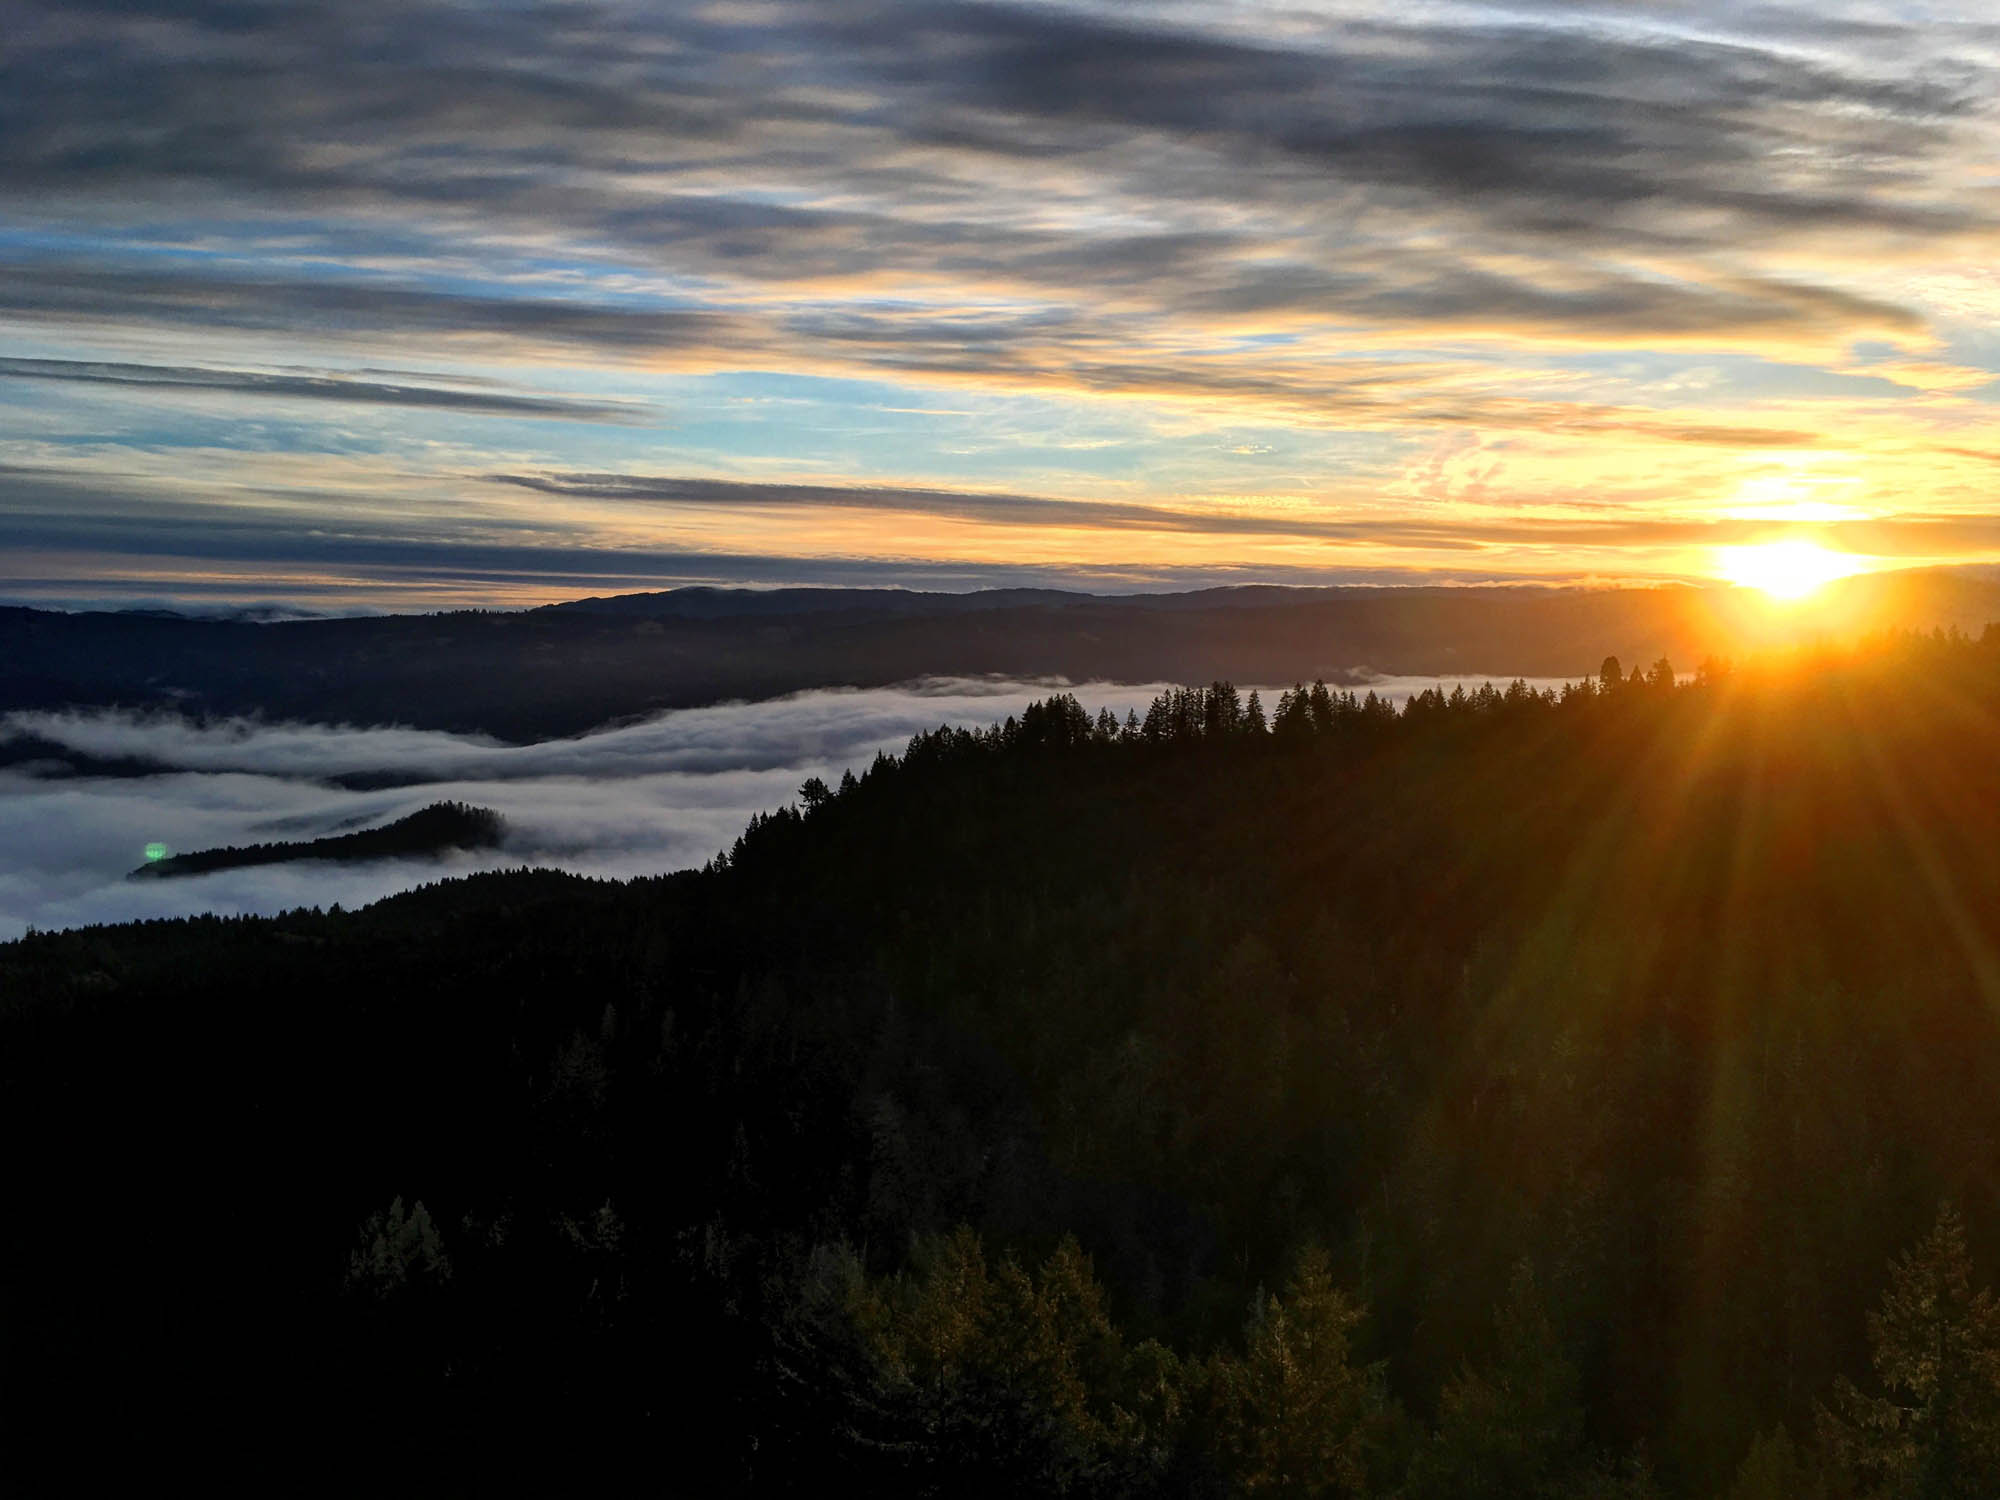 The sun rises over a foggy valley